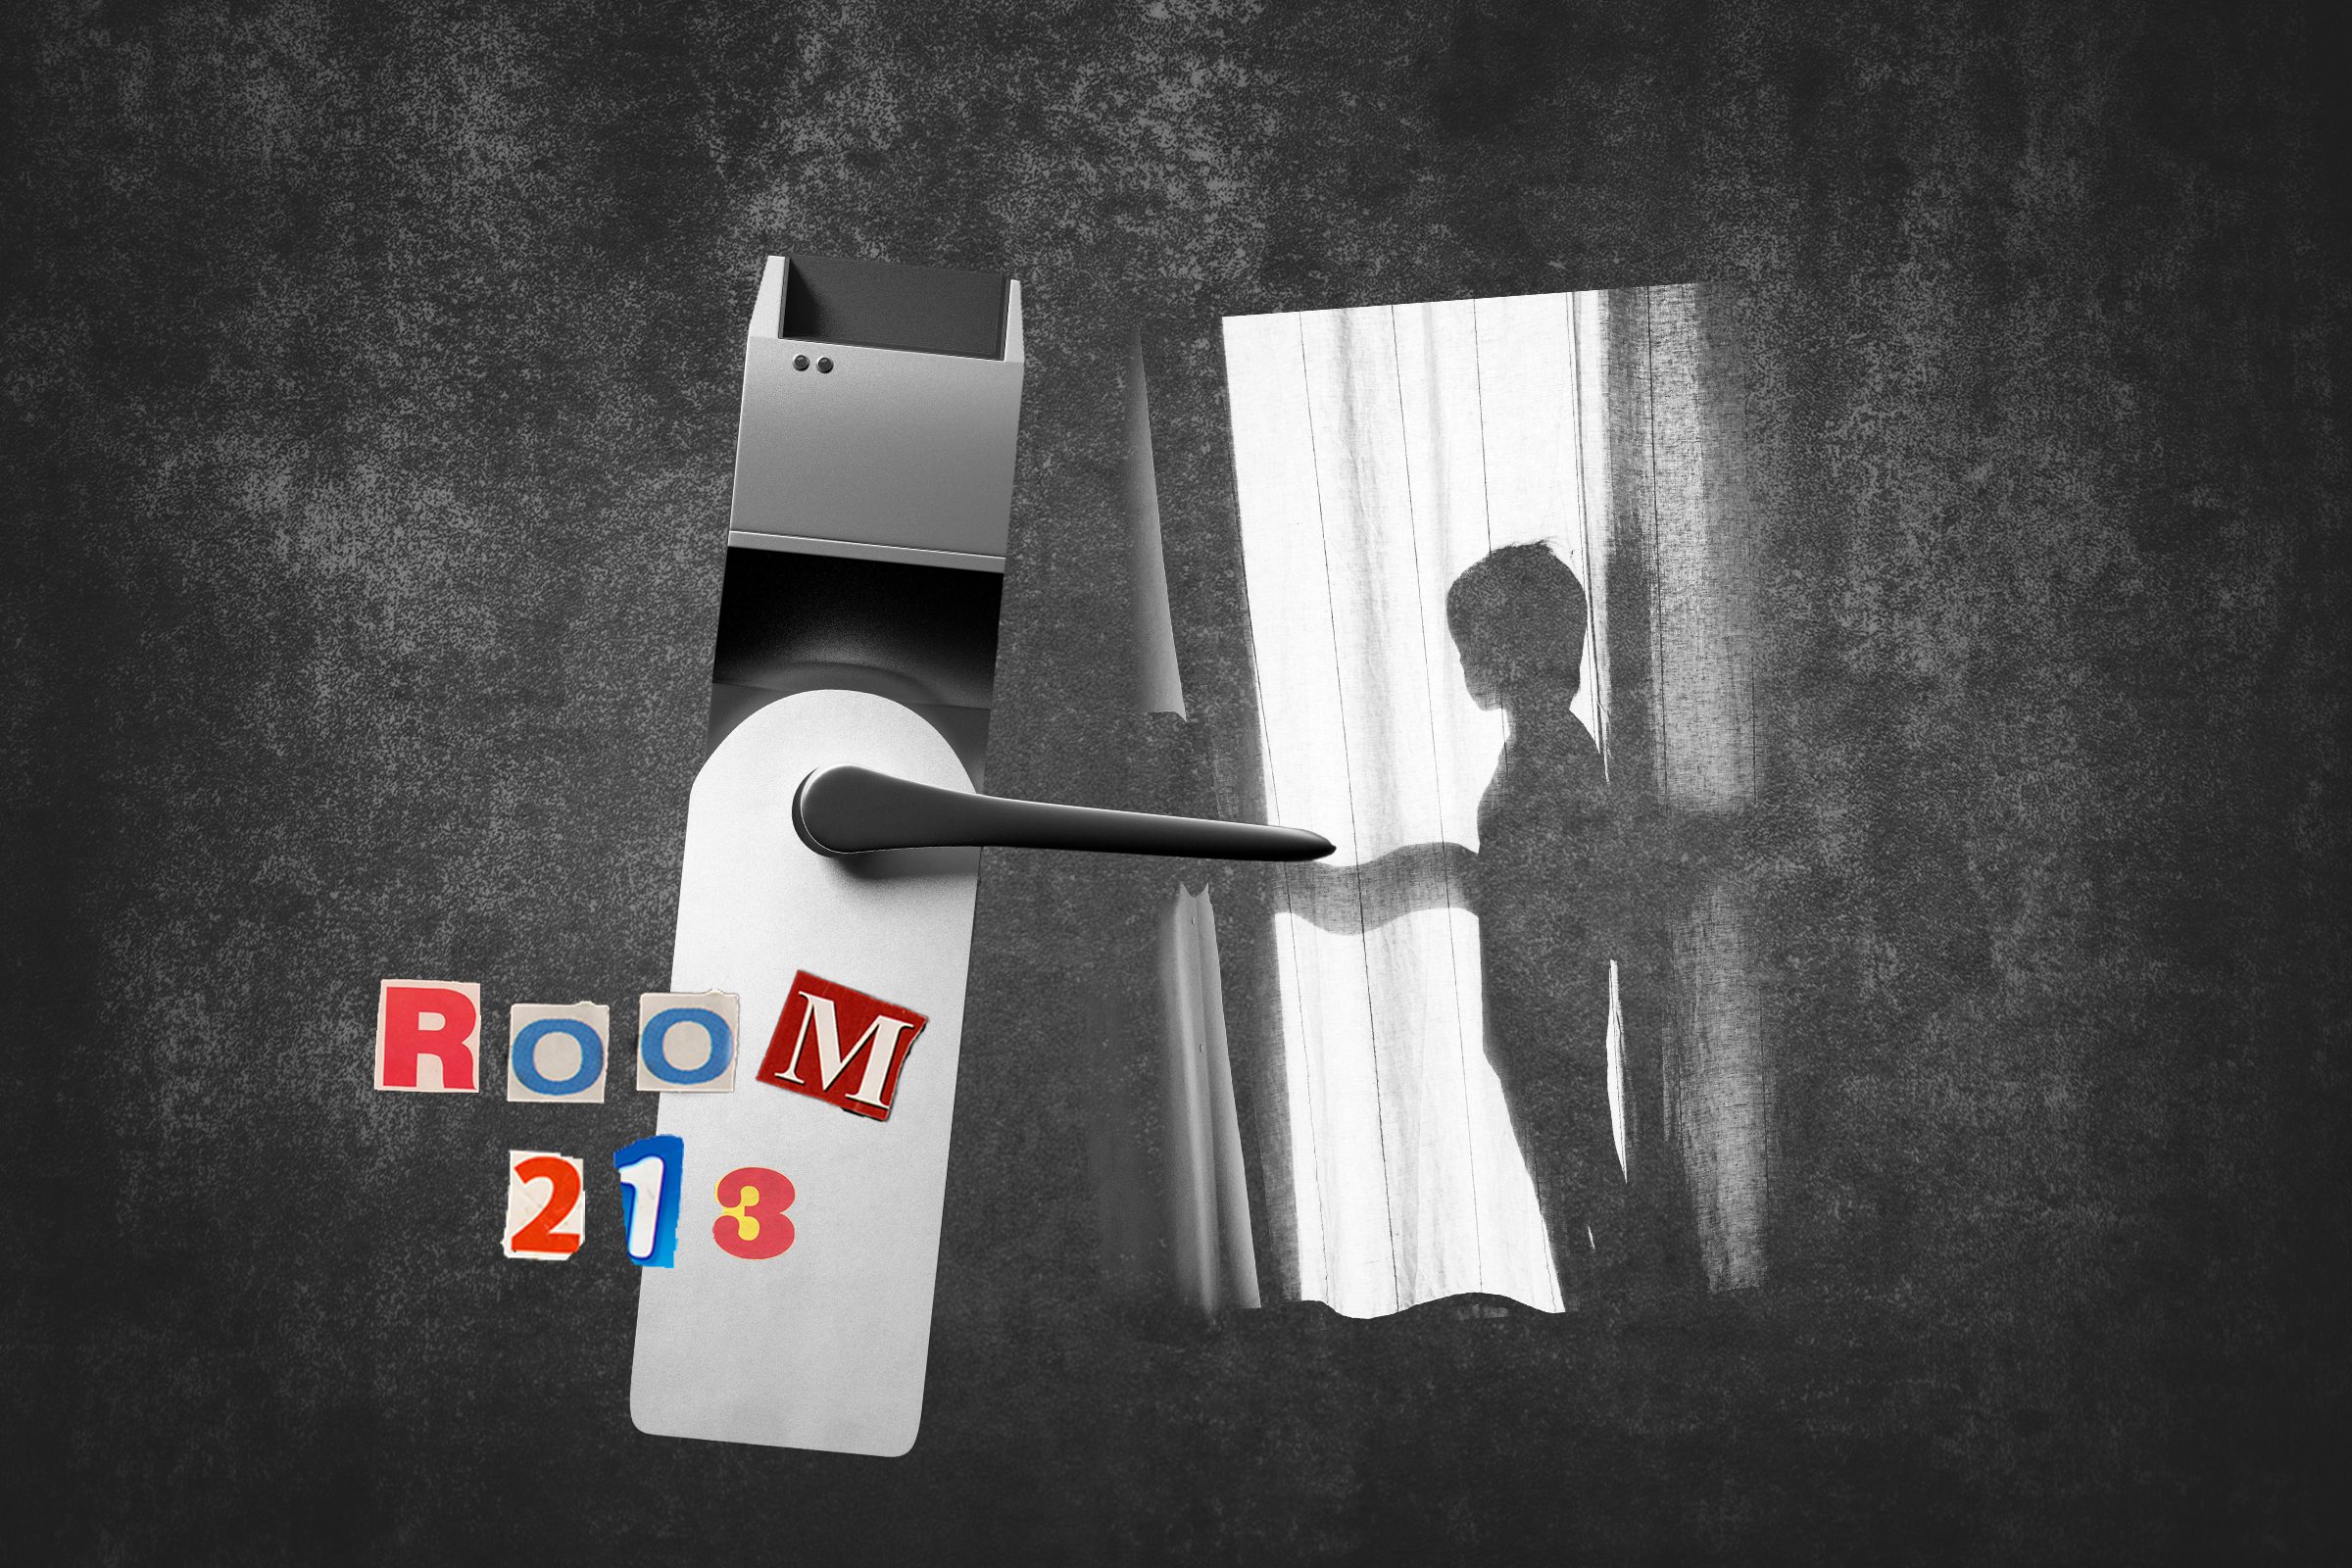 Hotel Room Doorknob Next To Silhouette Of Boy With Text Room 213